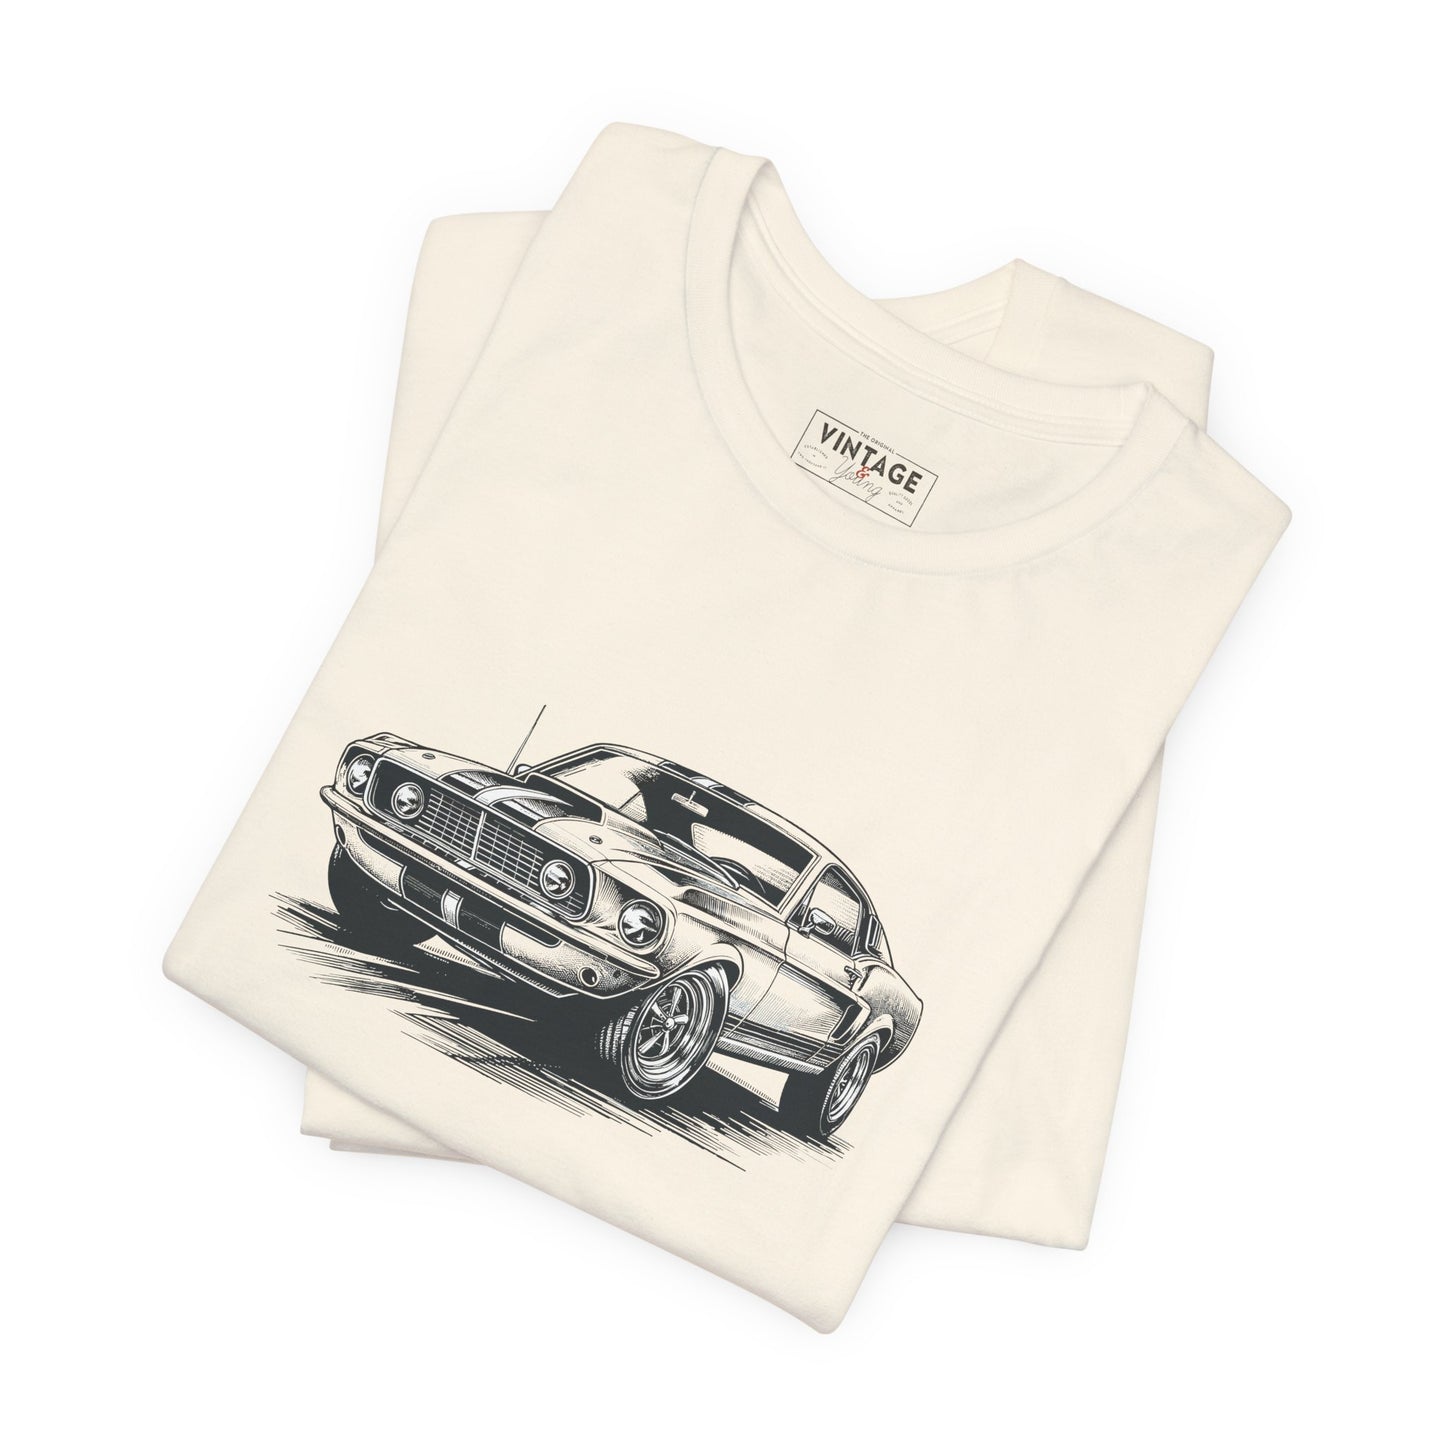 Vintage Mustang Hand-Drawn Style T-Shirt